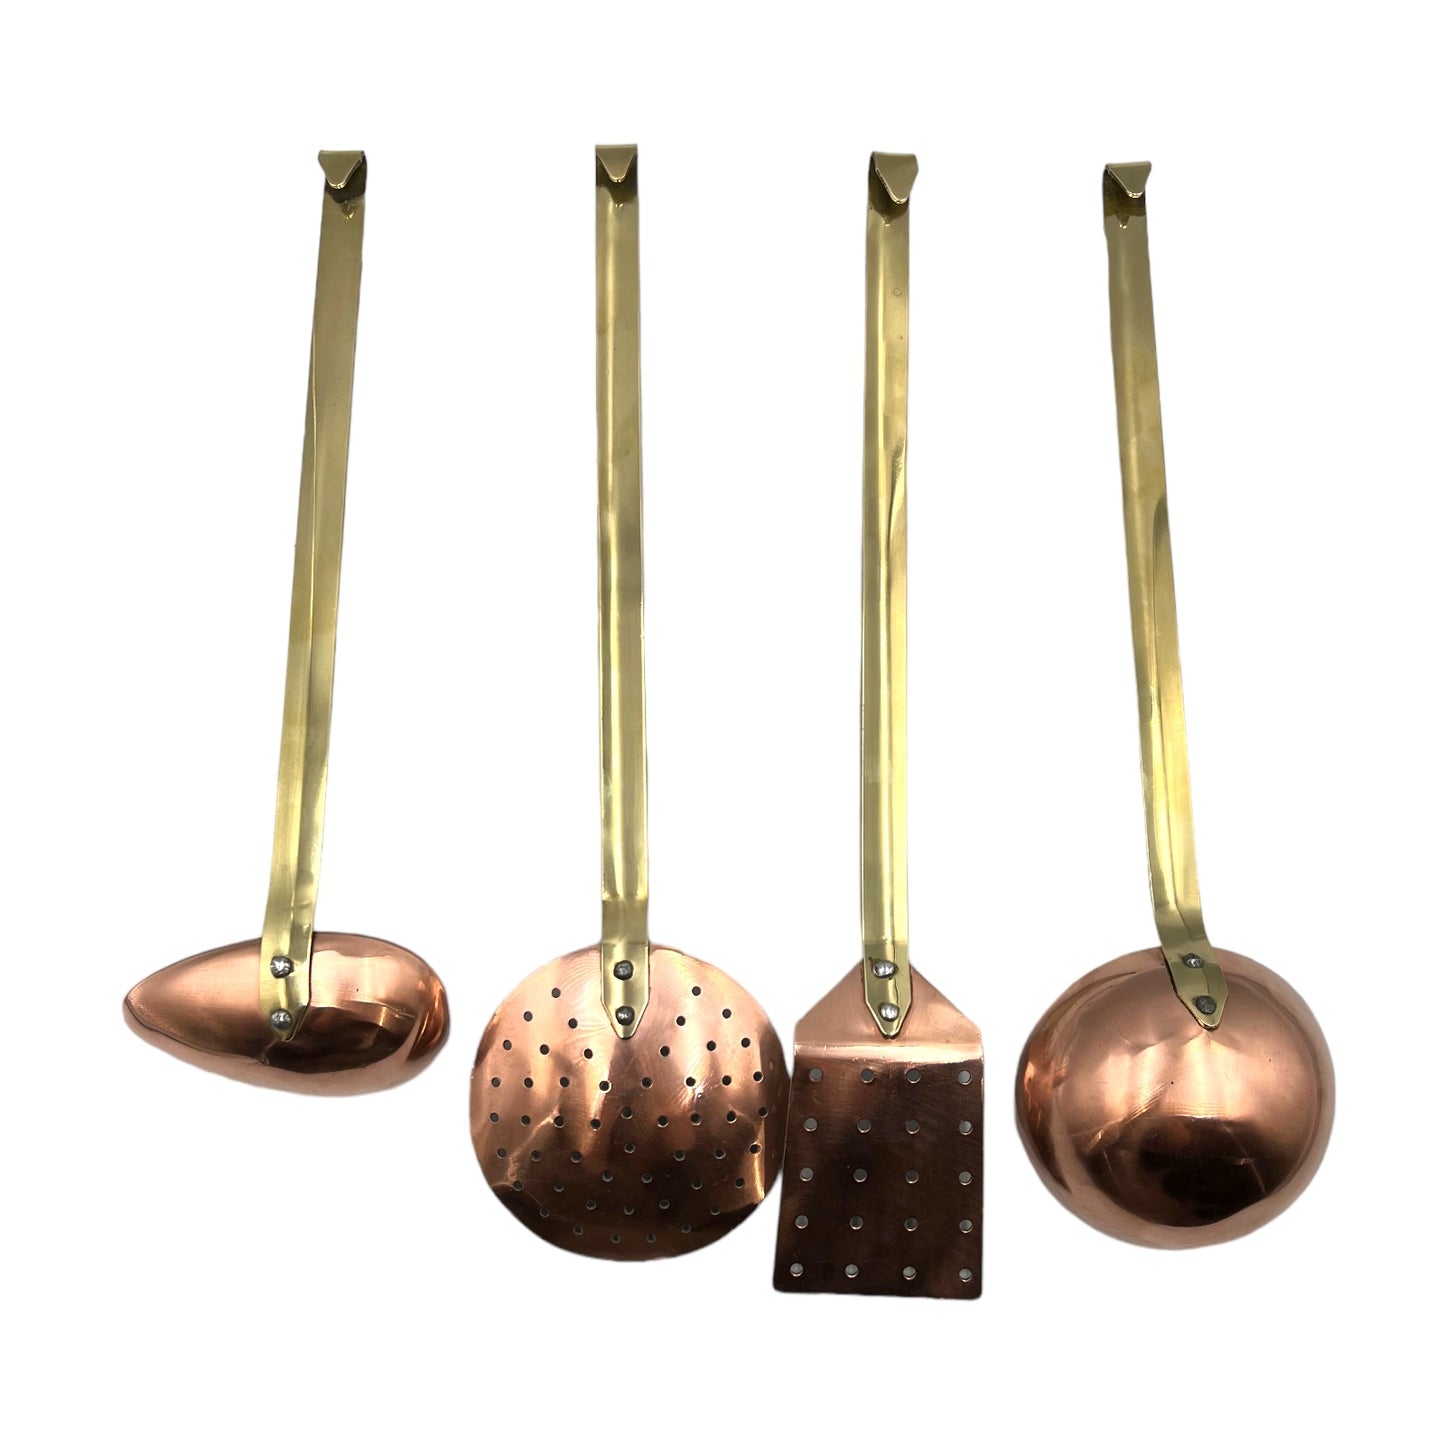 set of 4 French copper kitchen utensils with brass handles